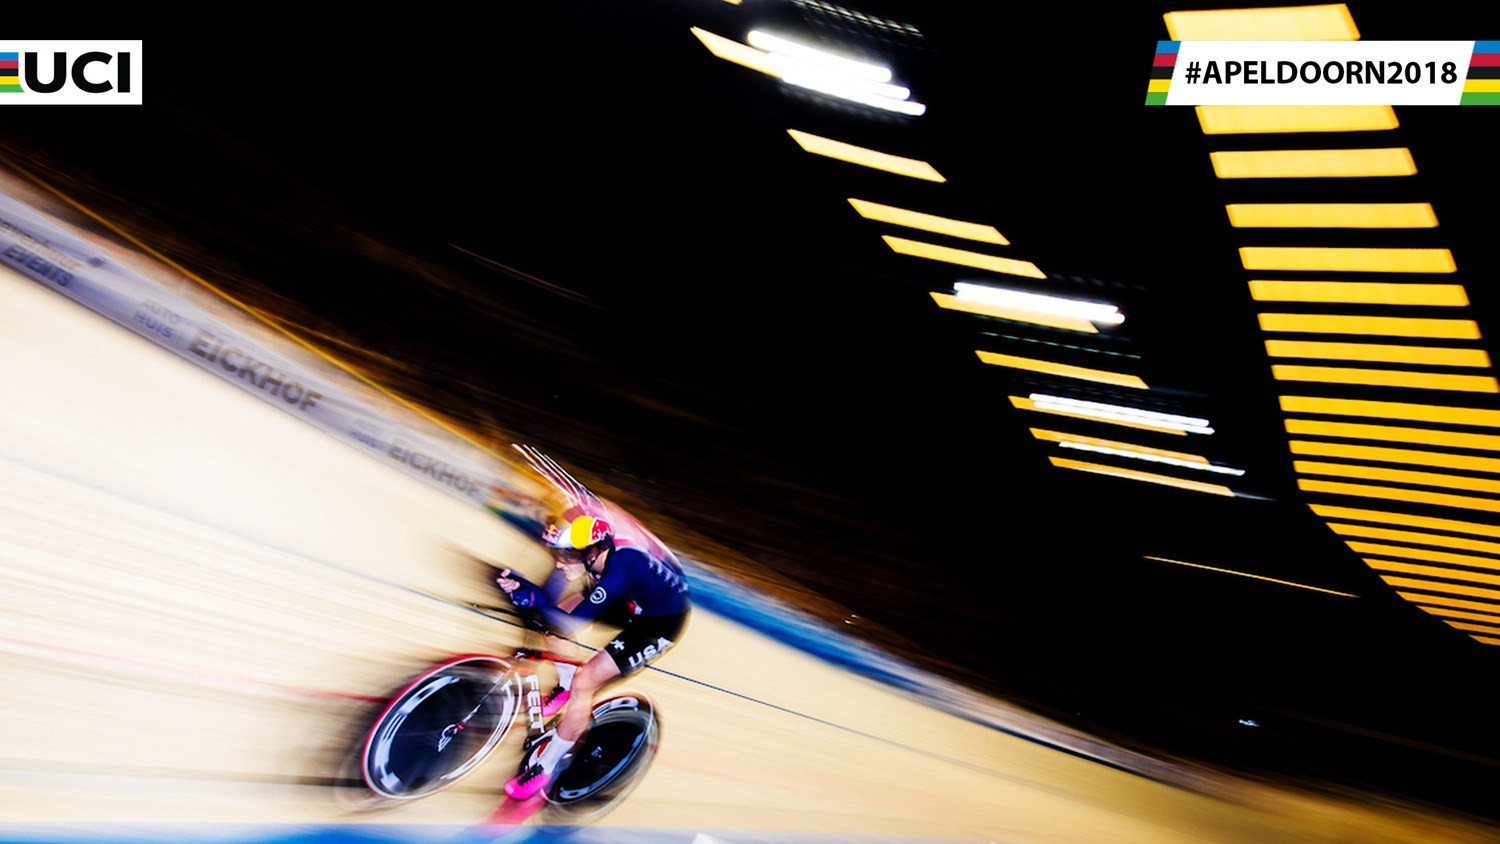 Dygert twice breaks world record at UCI World Track Championships in Apeldoorn